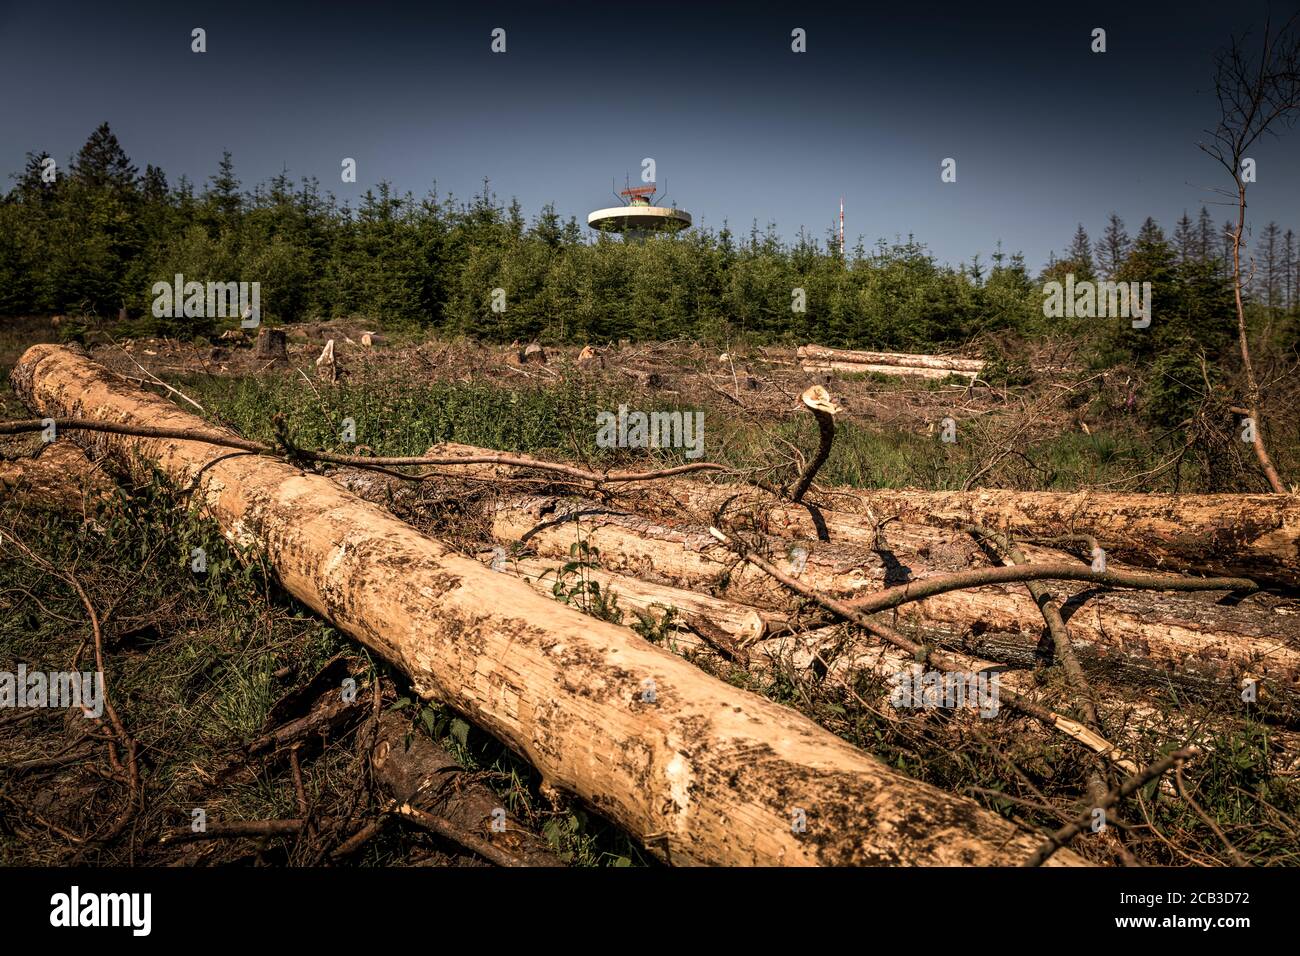 Forest dieback in the Sauerland. Whole spruce forests near Luedenscheid in the Sauerland region have been damaged by the bark beetle and died. The infested trees must be cut down quickly so that the beetle cannot spread further to infest other weakened trees. The great drought in the forests also causes the trees to die. © Frank Schultze / Zeitenspiegel Stock Photo